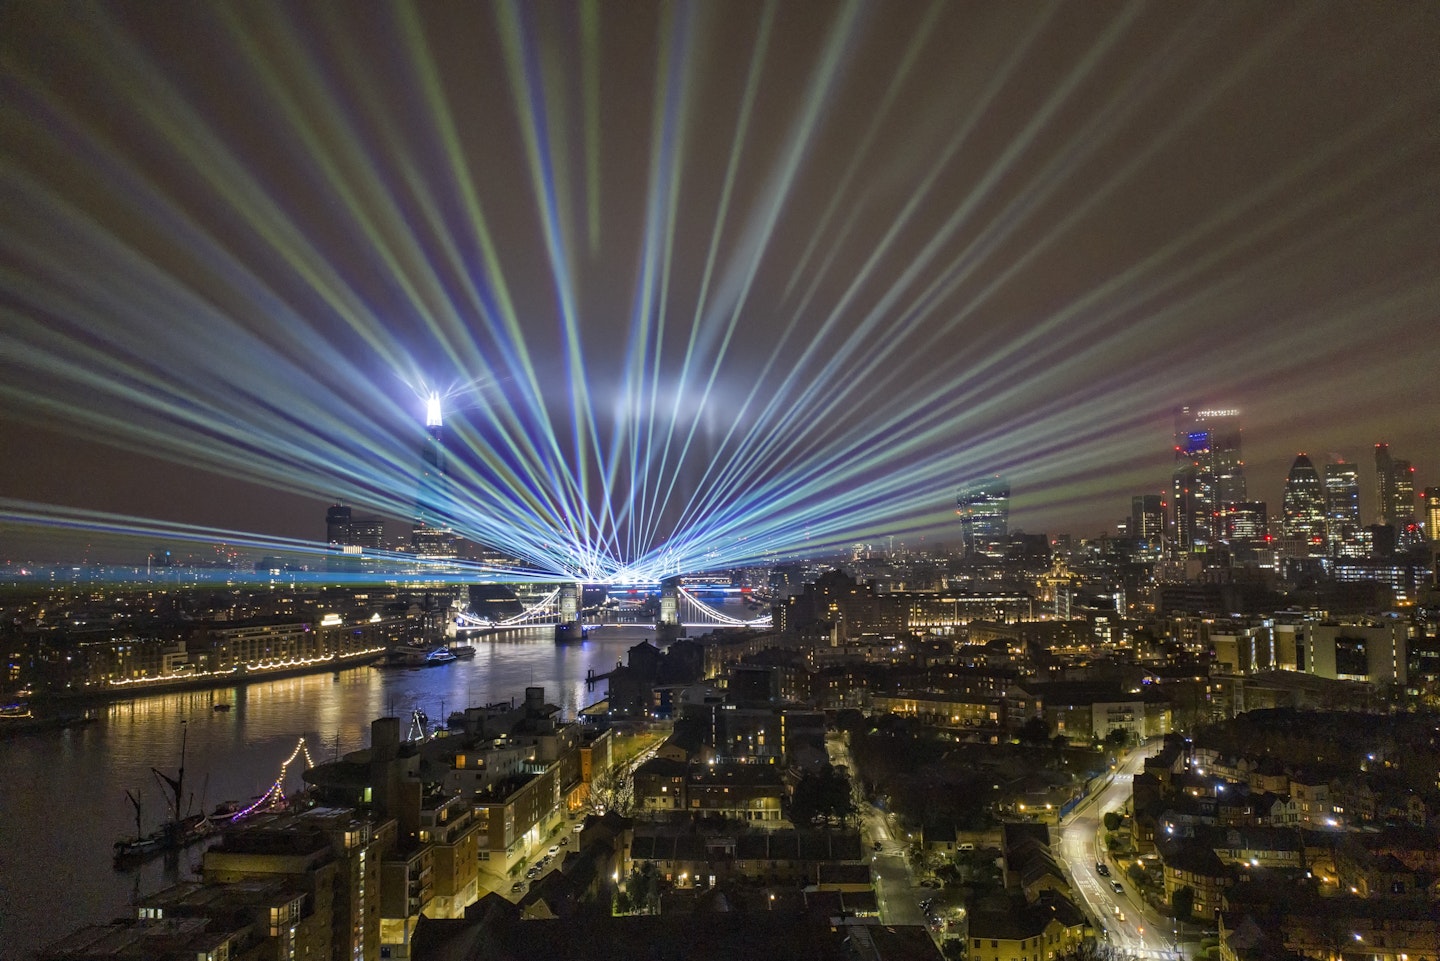 The surprise New Year's Eve firework display in London